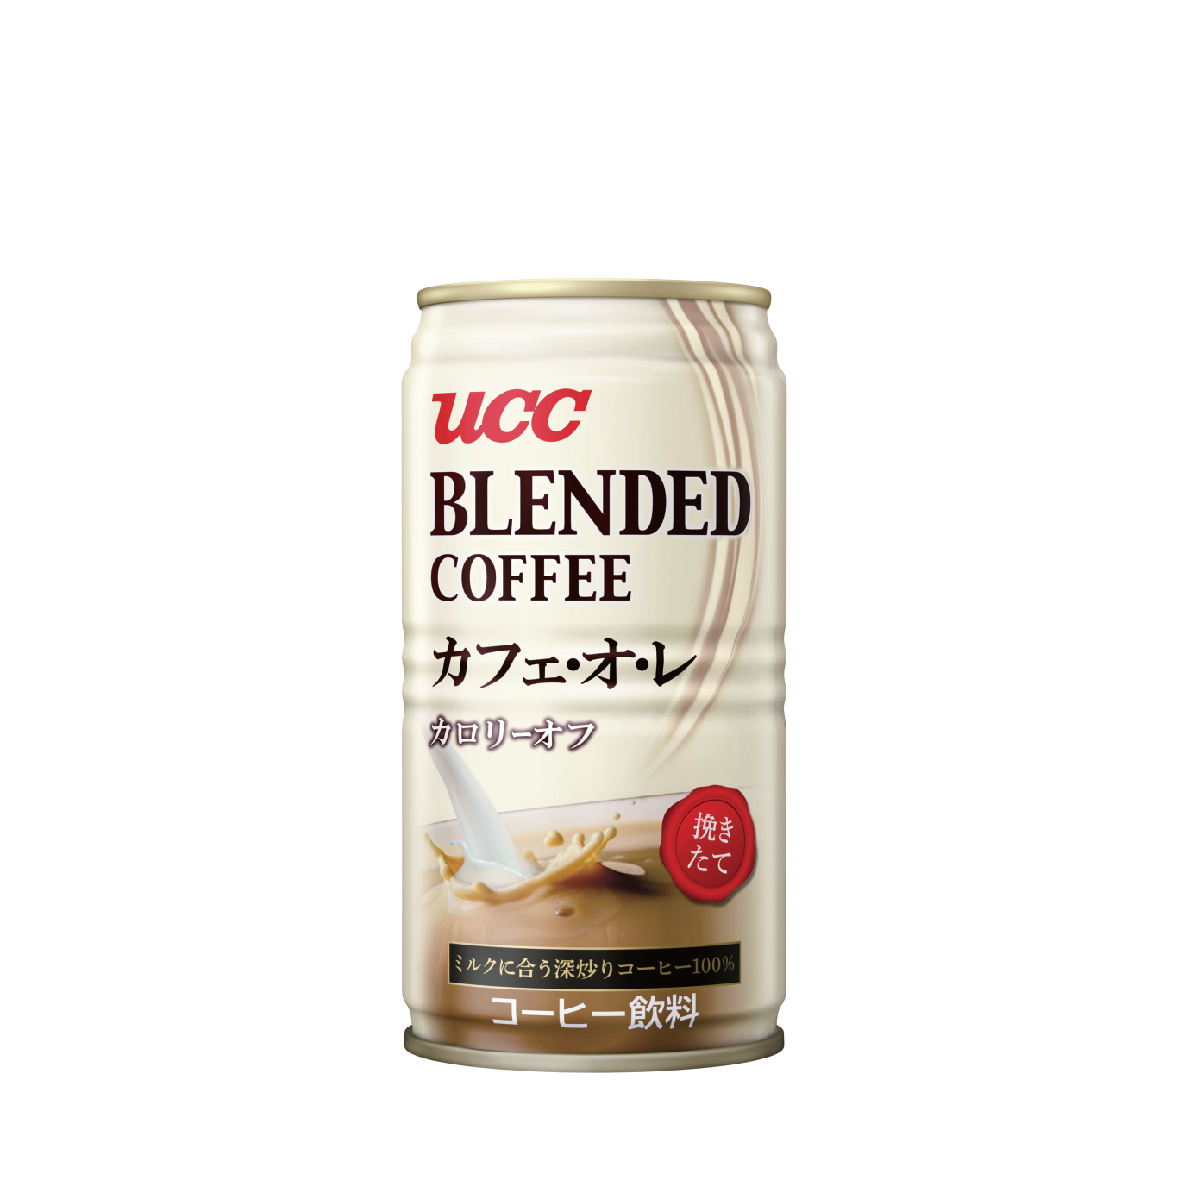 UCC Blended Coffee Cafe Au Lait